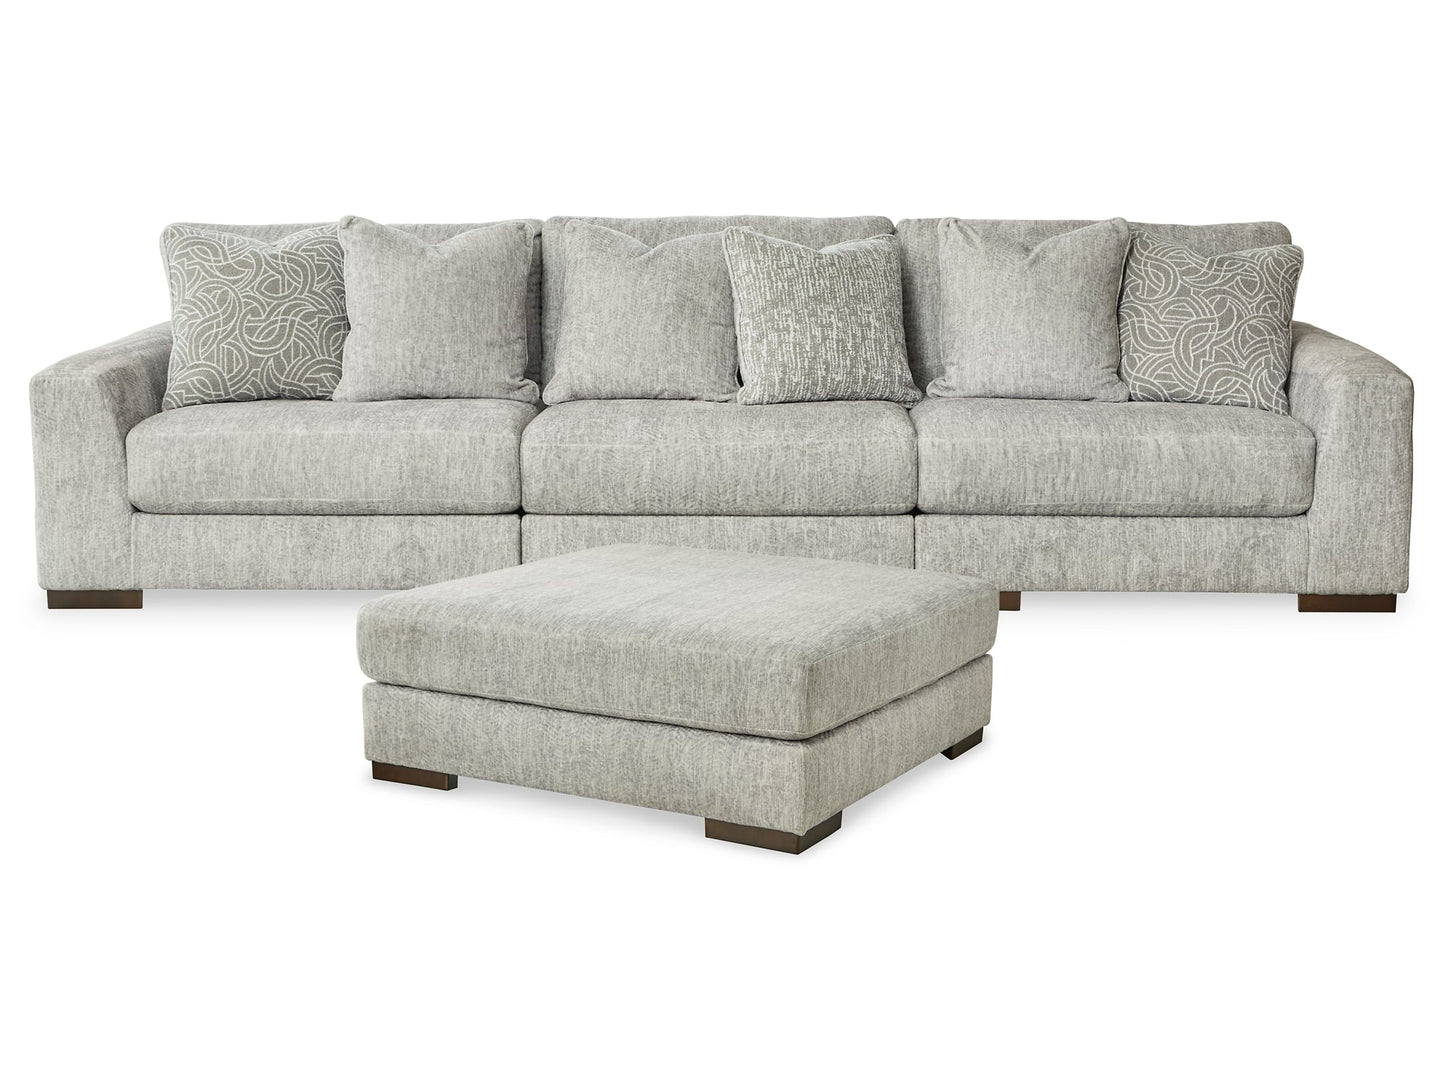 Regent Park 3-Piece Sectional with Ottoman at Walker Mattress and Furniture Locations in Cedar Park and Belton TX.